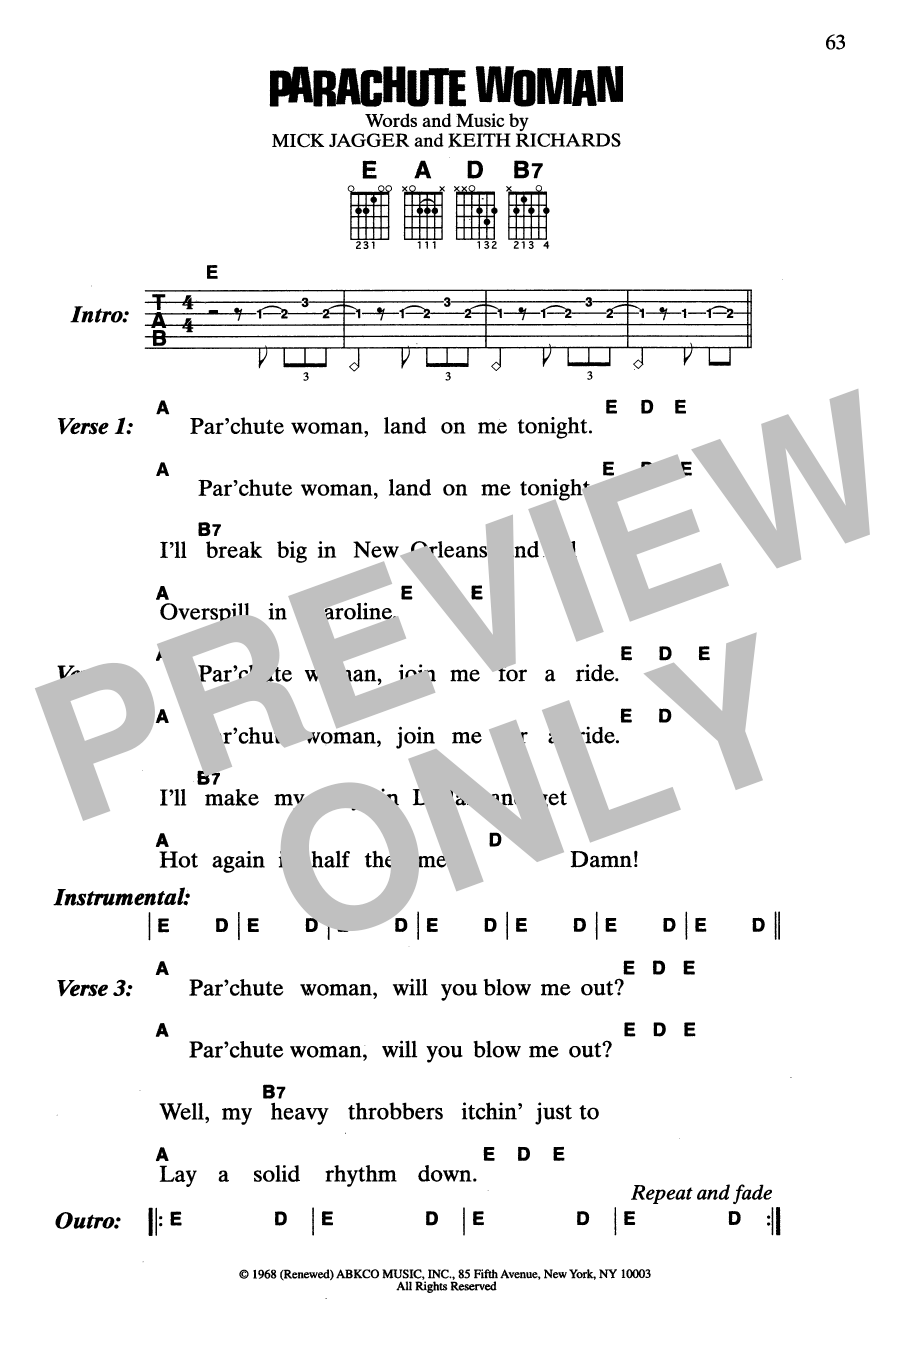 Download The Rolling Stones Parachute Woman Sheet Music